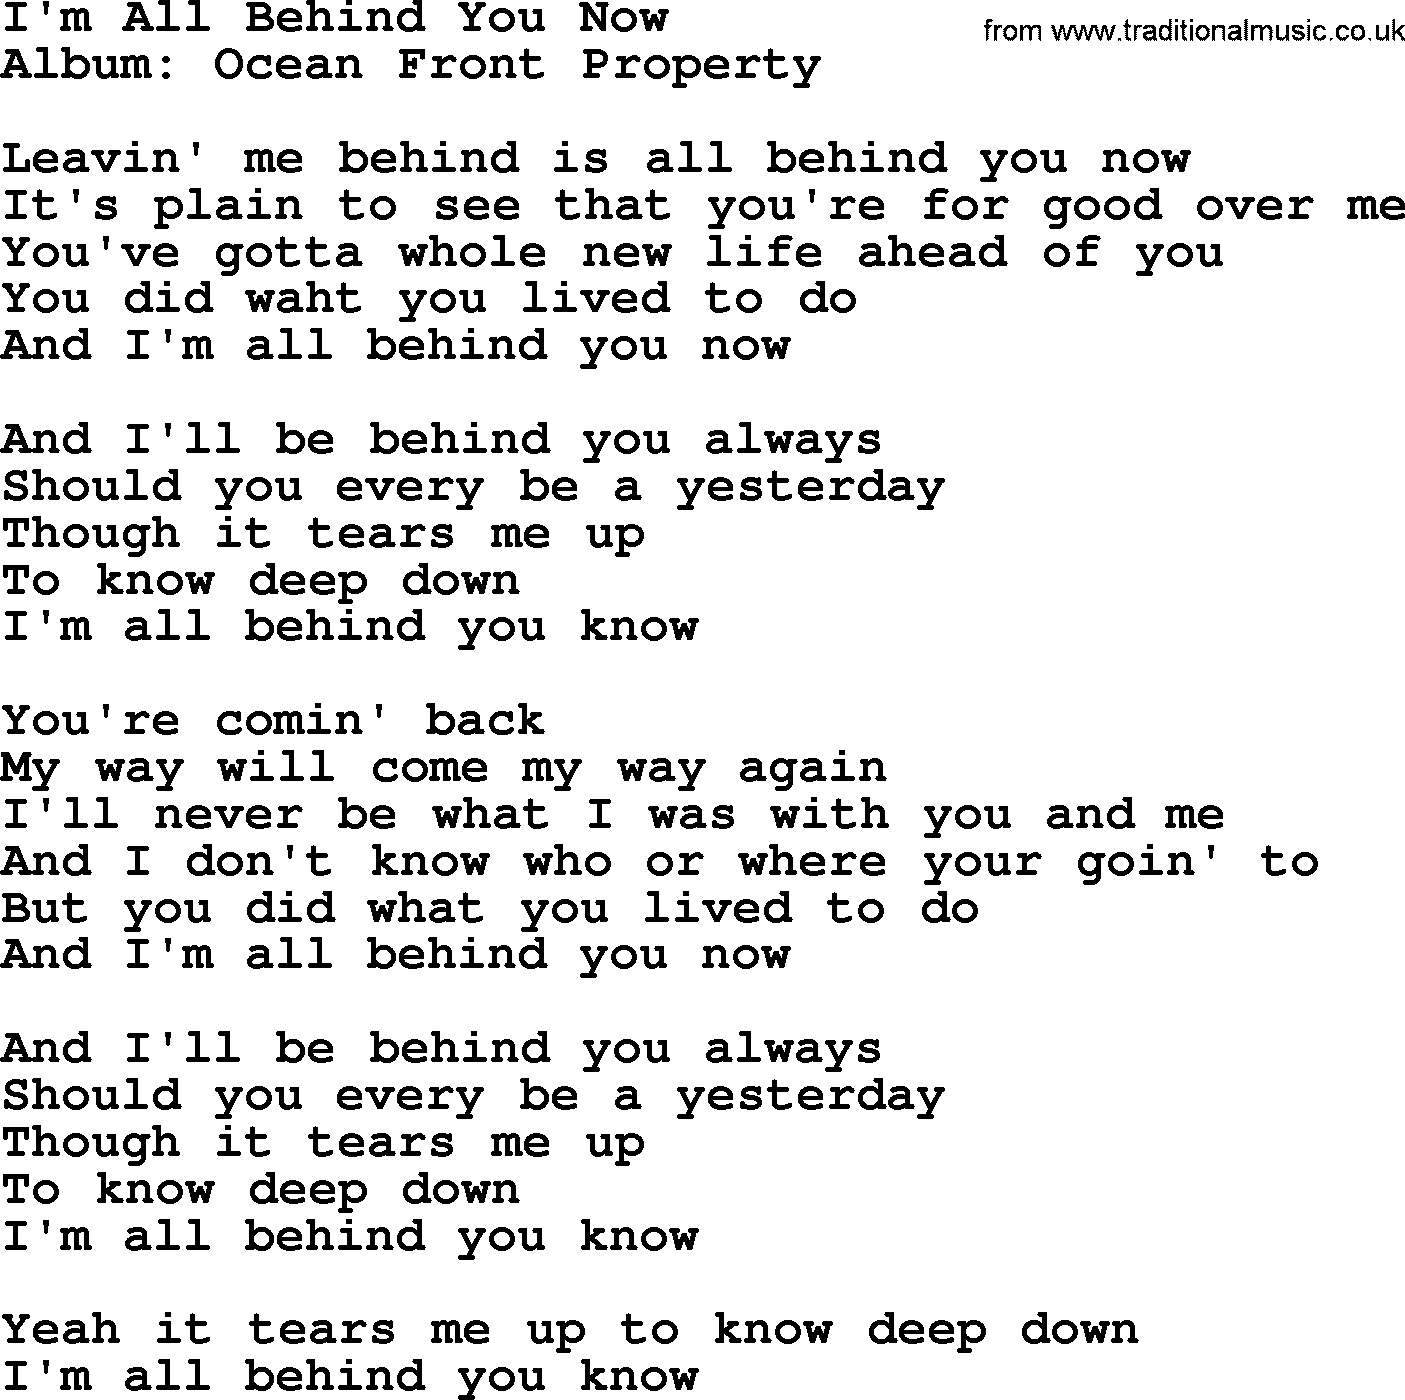 George Strait song: I'm All Behind You Now, lyrics